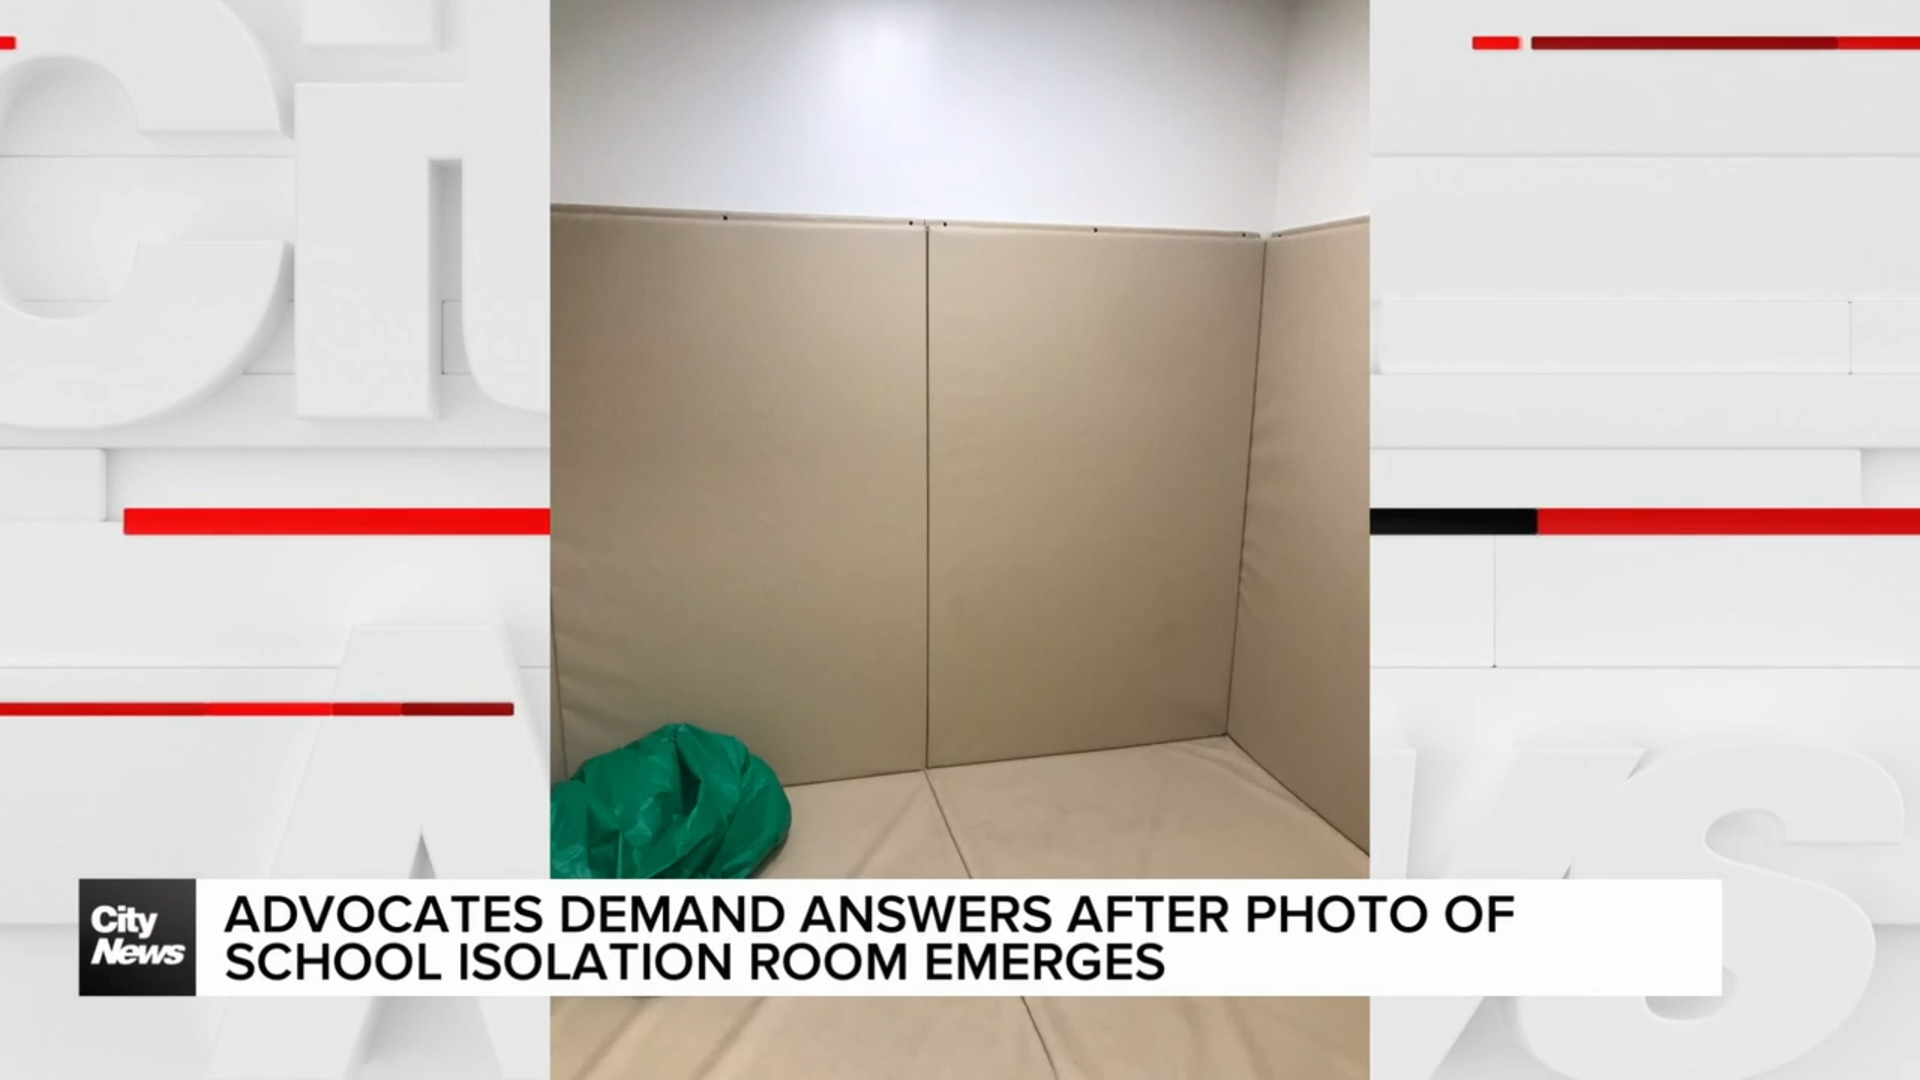 Advocates demand answers after photo of school isolation room emerges